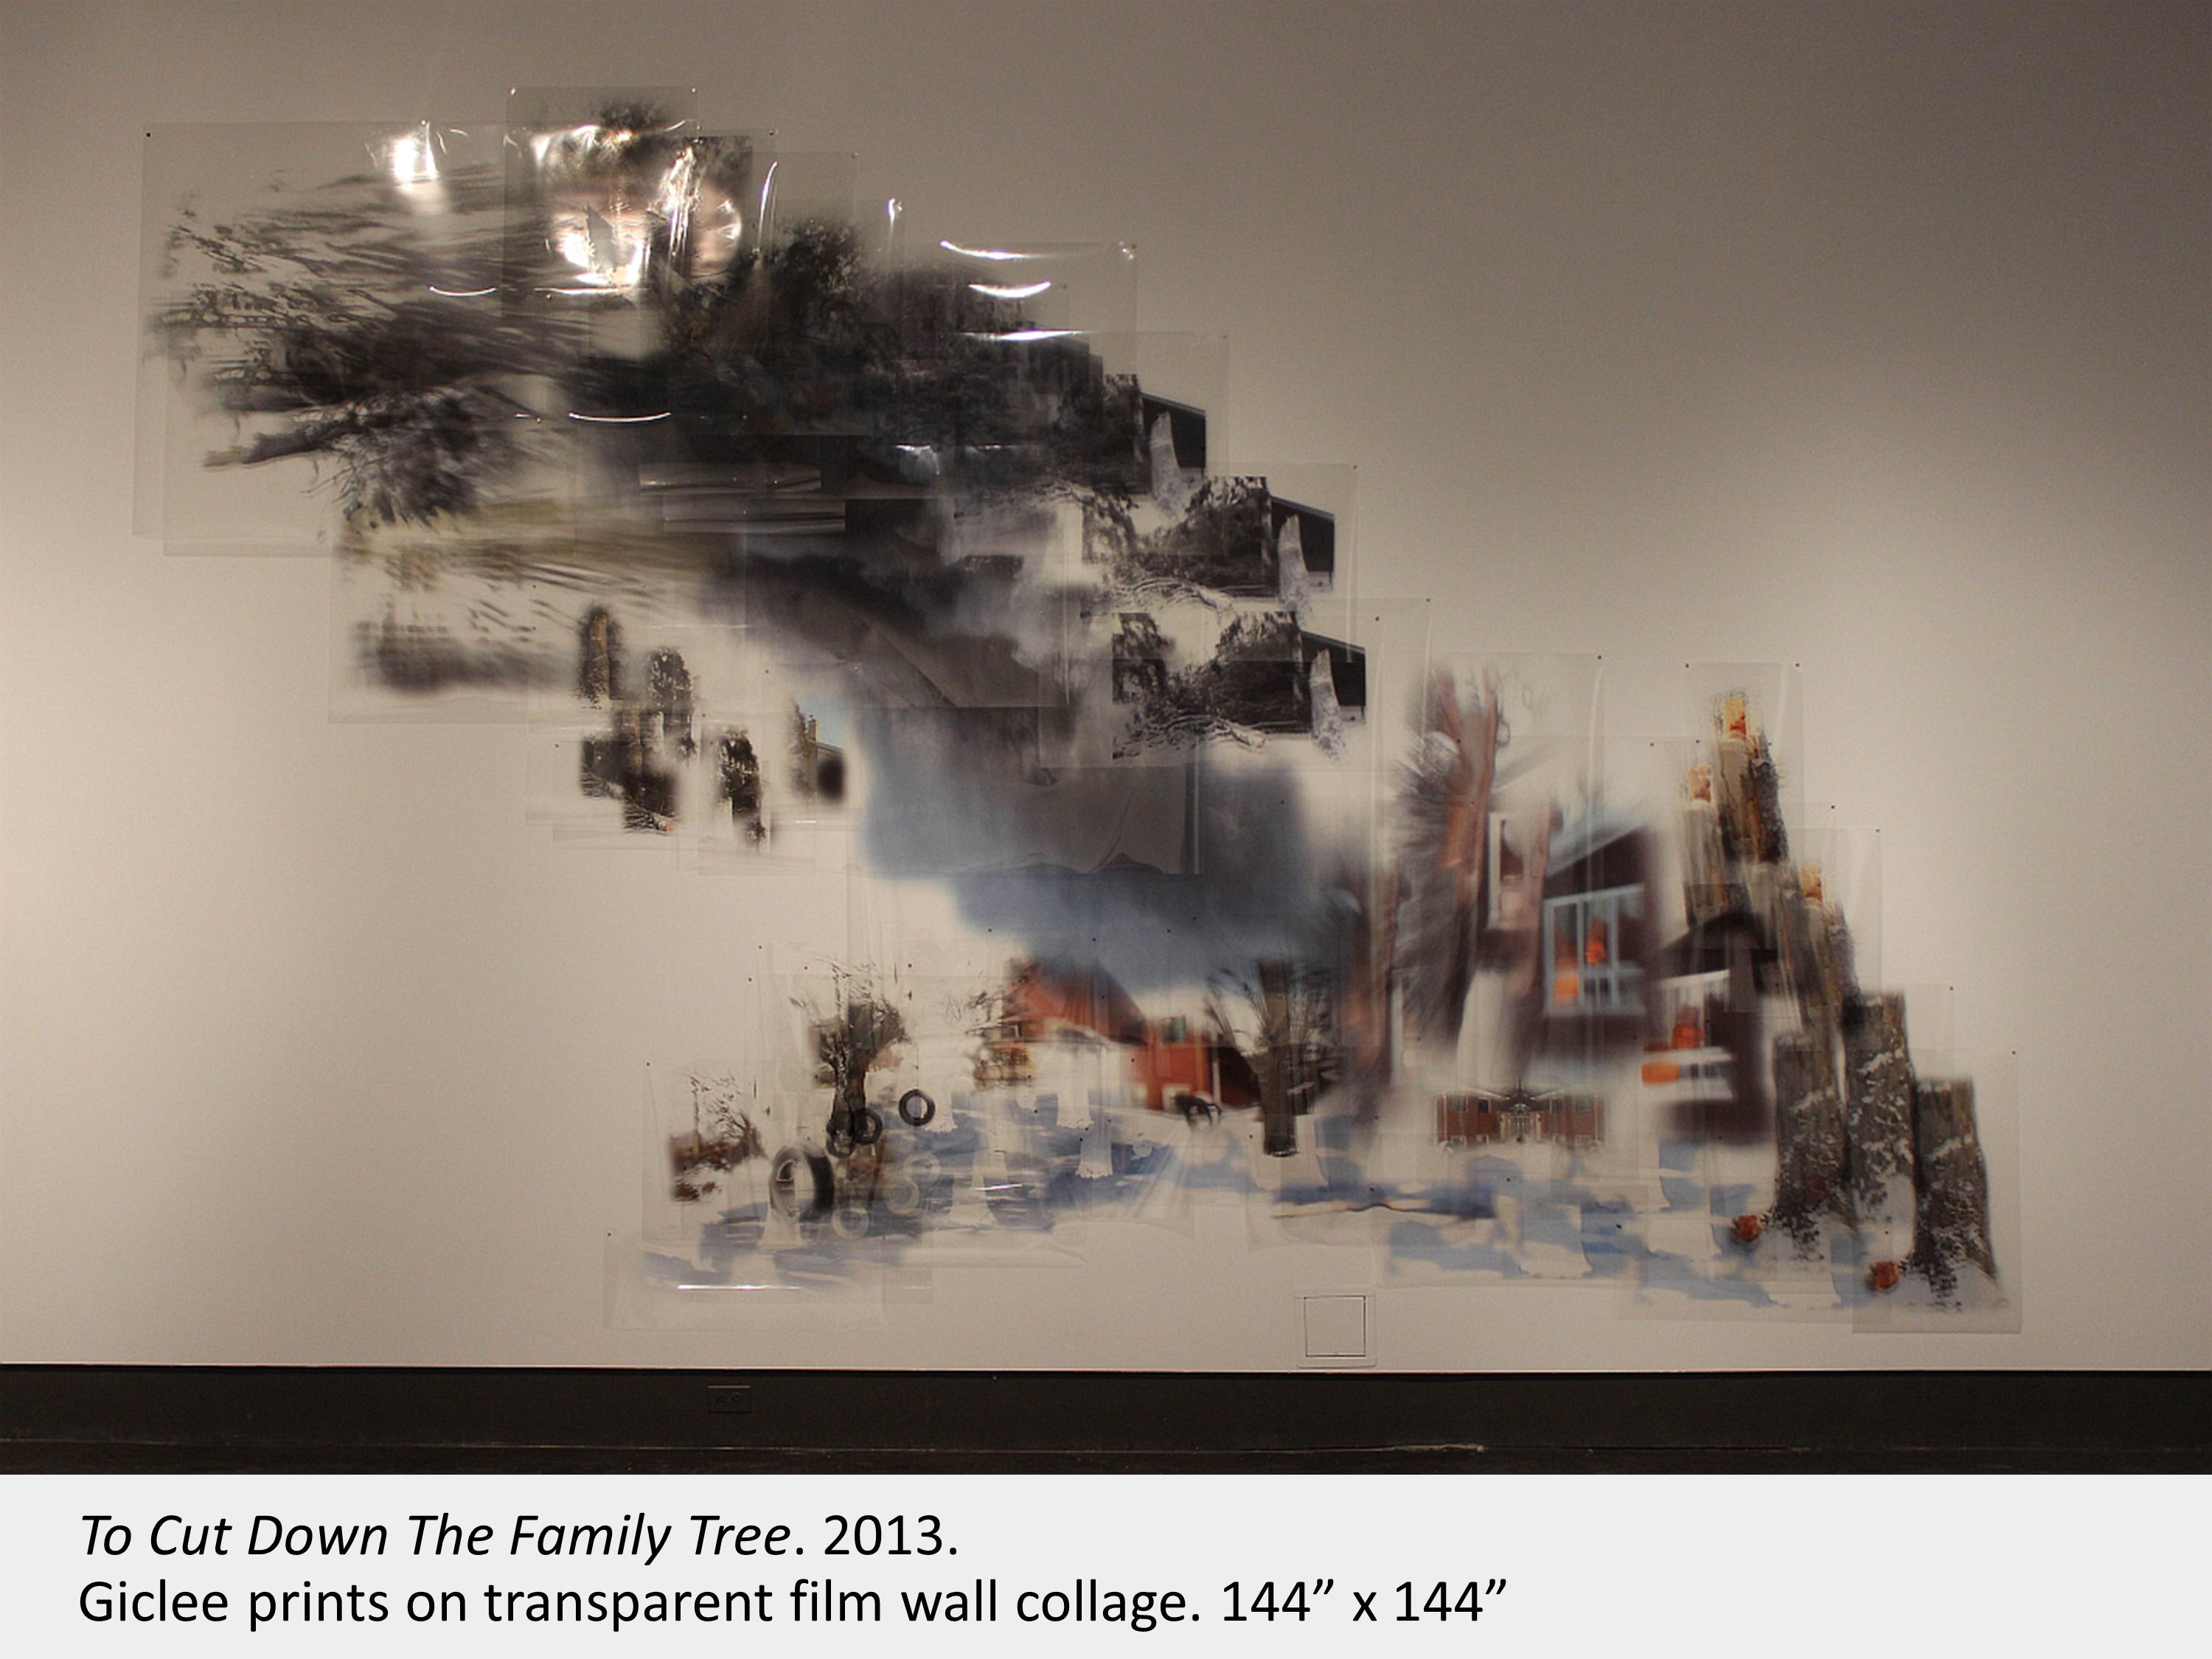 Artwork by Natalie Hunter. To Cut Down The Family Tree. 2013. Giclee prints on transparent film wall collage. 144” x 144” 